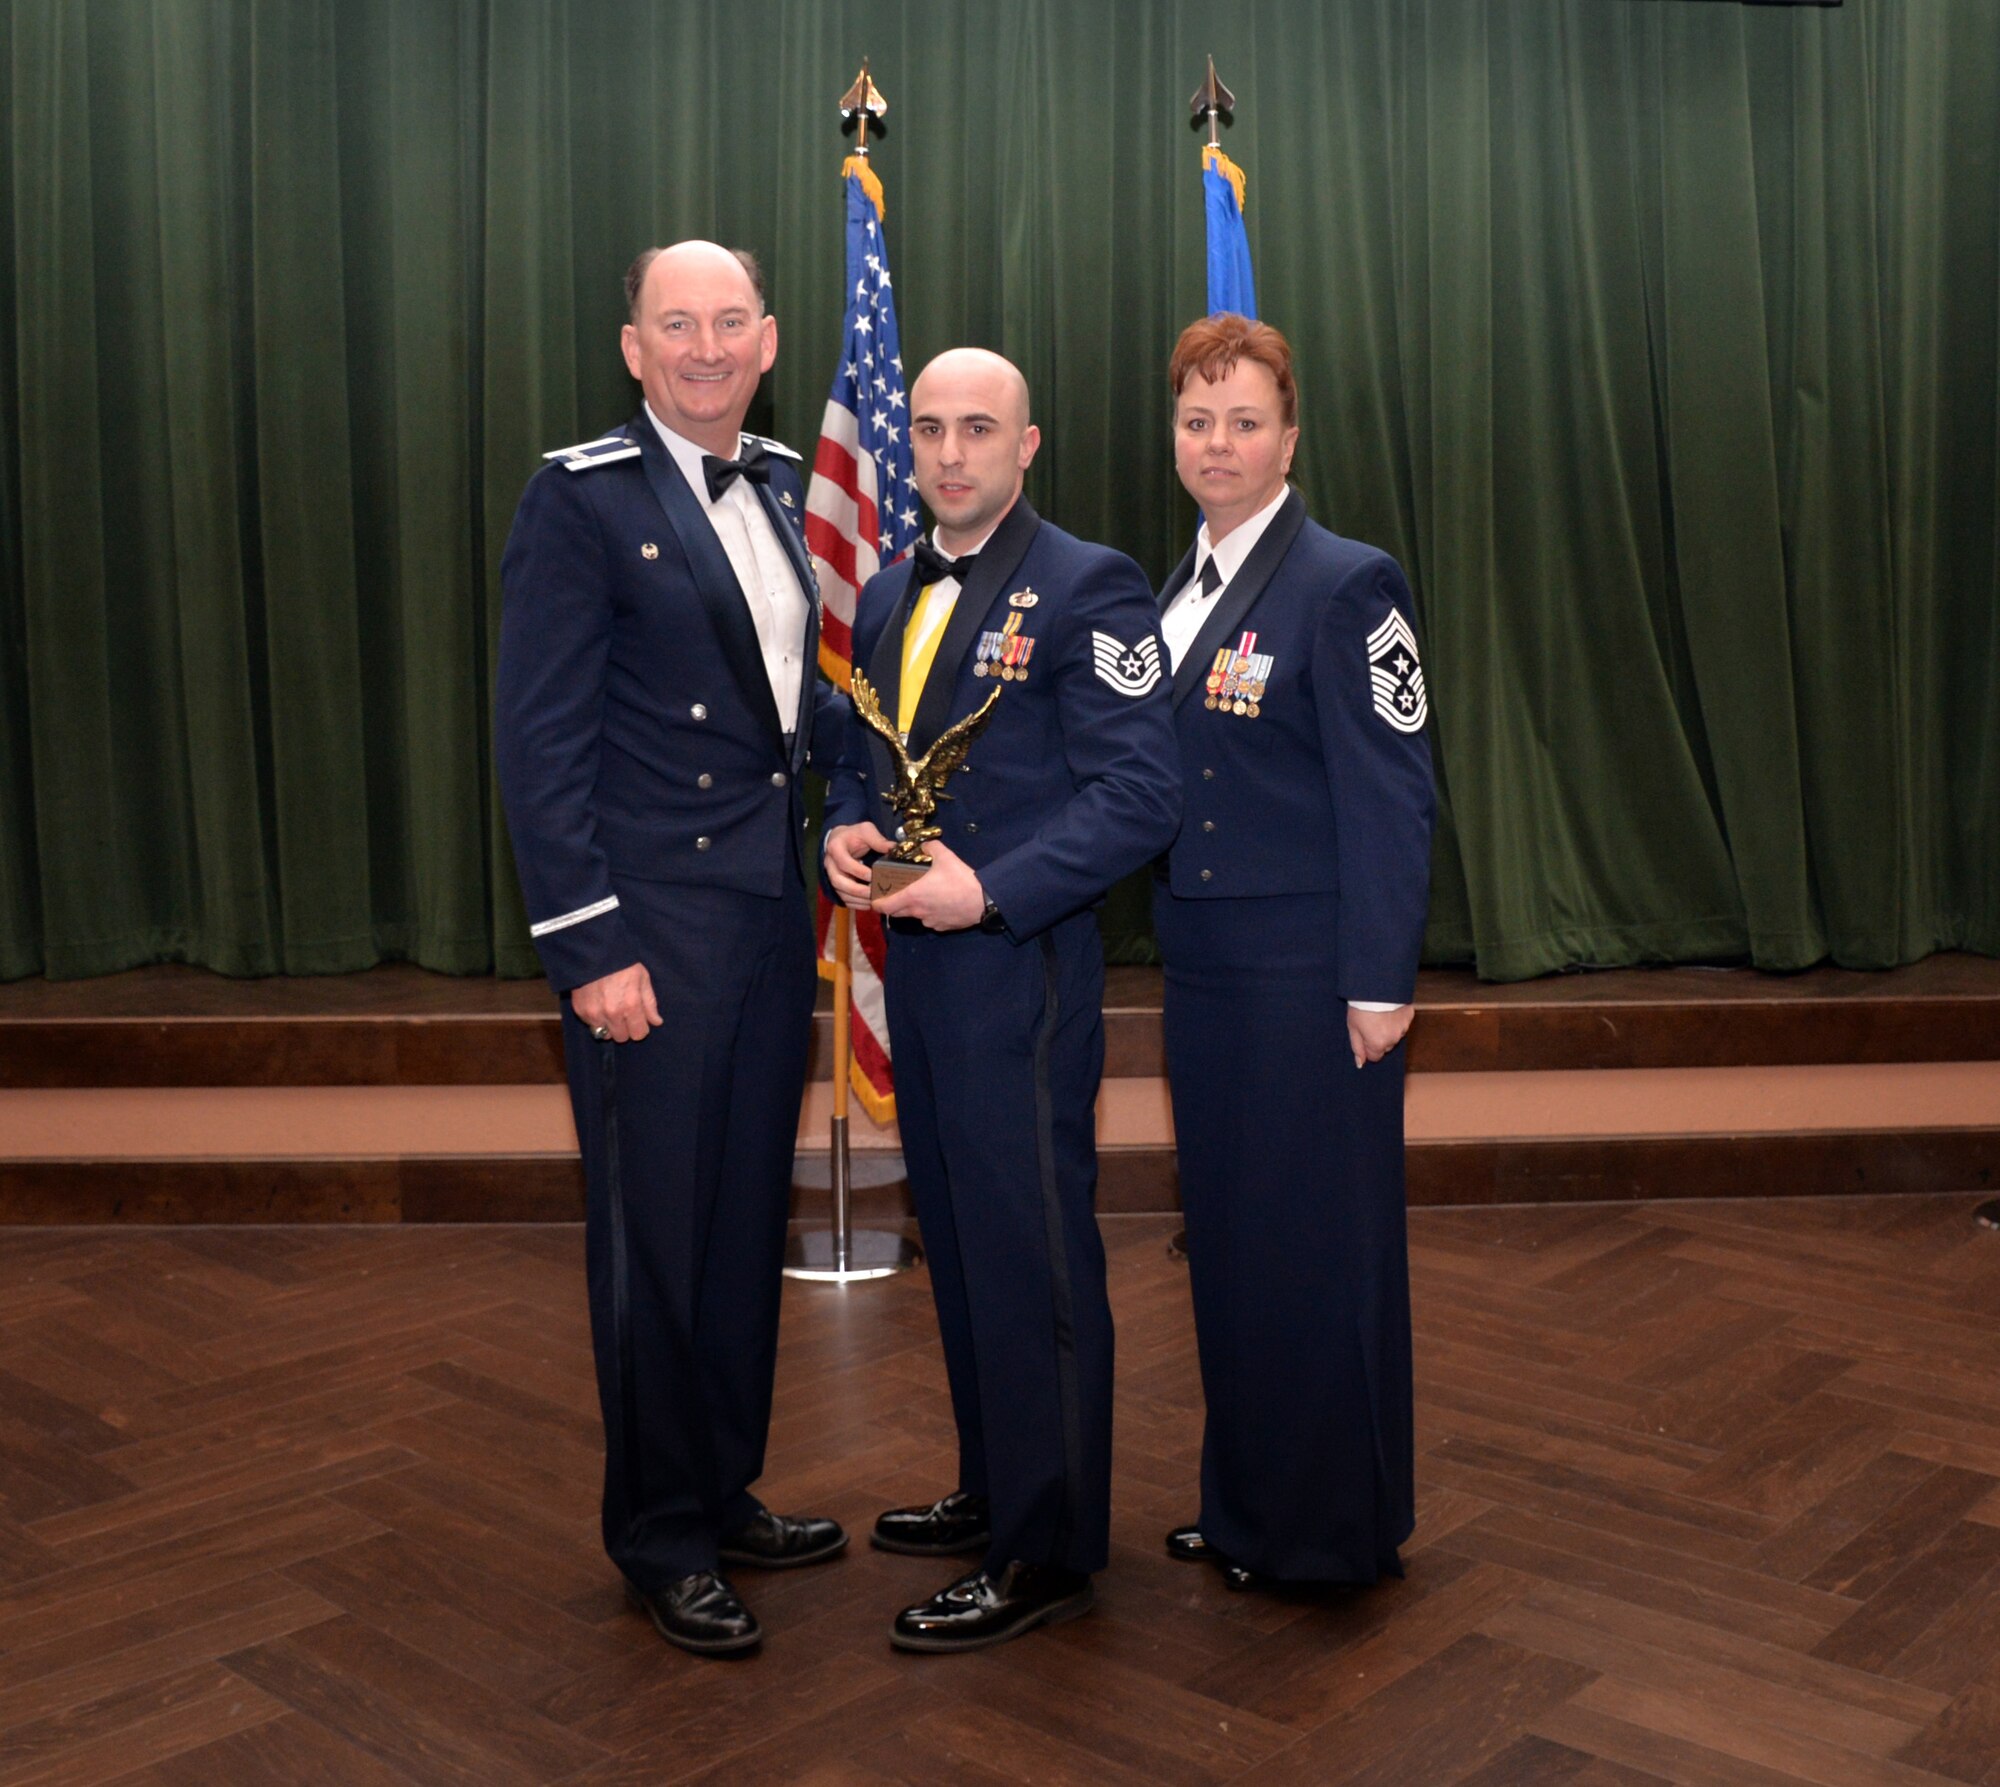 Col. Thomas K. Smith, 433rd Airlift Wing commander, and 433rd AW Command Chief Master Sgt. Shana C. Cullum, award Tech. Sgt. Anthony Martin, 433rd Force Support Squadron, as the Noncommissioned Officer of the Year at the 433rd AW annual awards banquet at Joint Base San Antonio-Lackland, Texas Feb. 9, 2019.